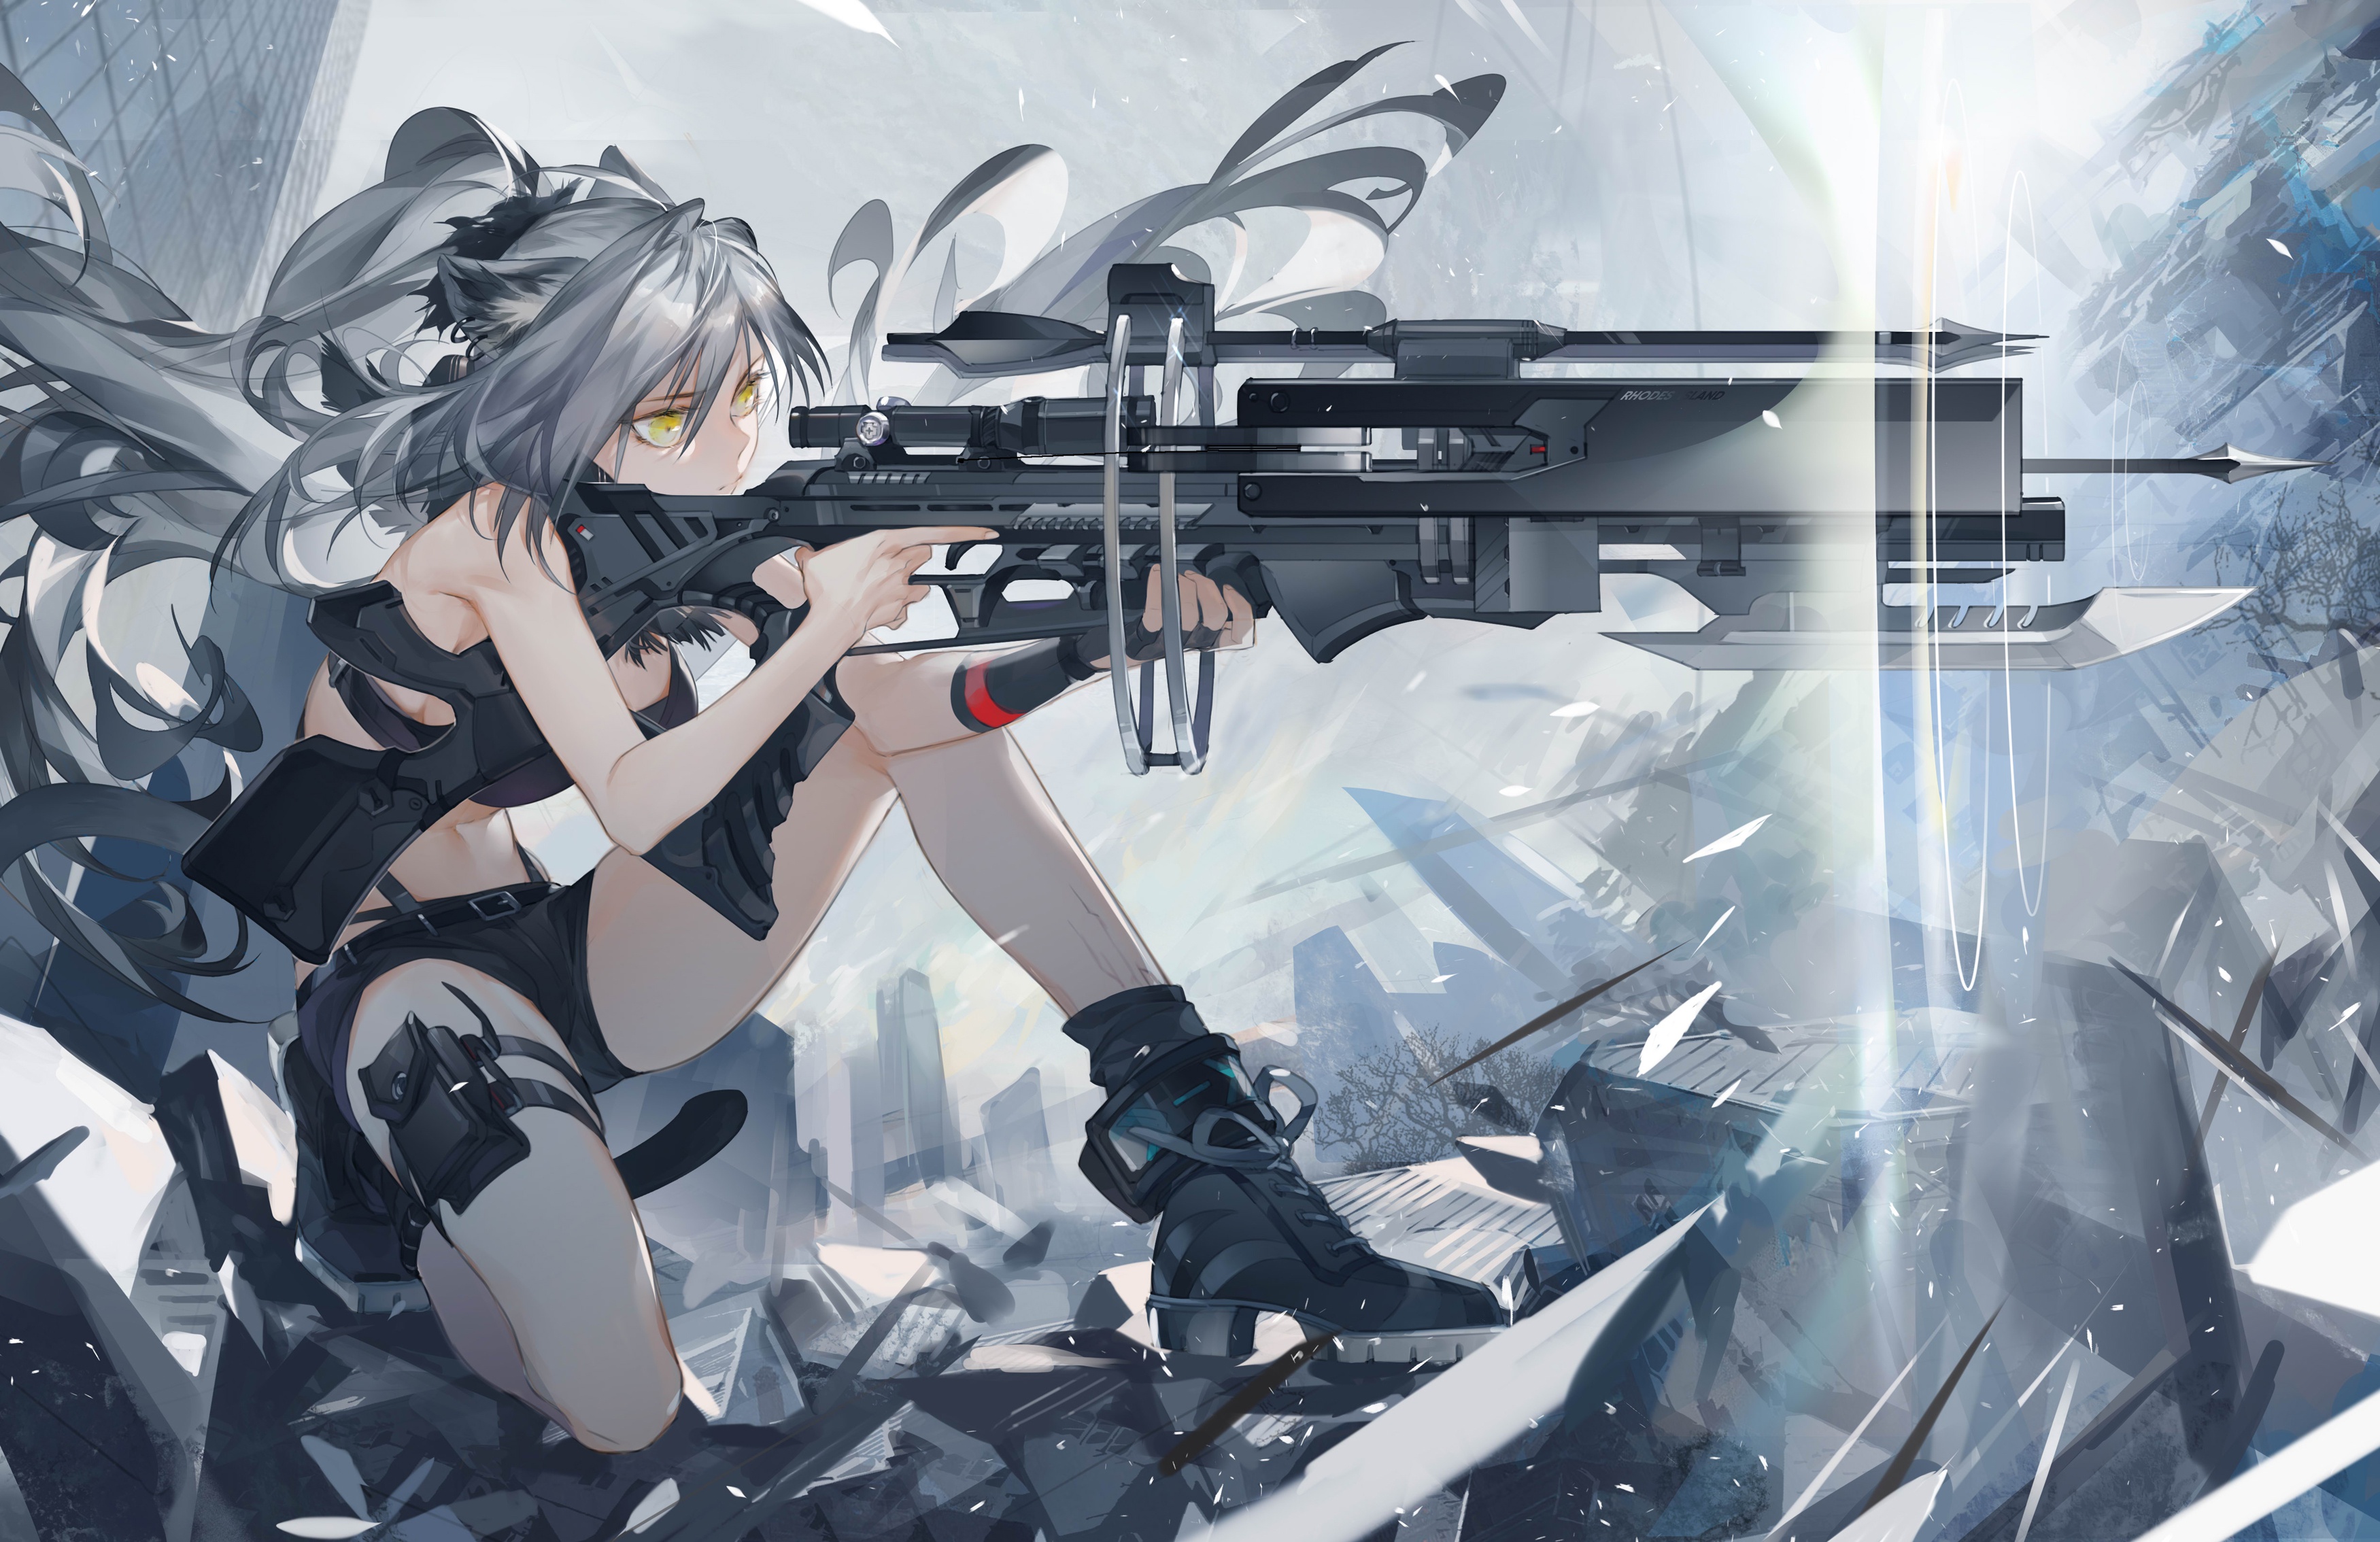 344362 Crossbow, Schwarz, Arknights, Anime Girls, Video Game 4k - Rare  Gallery HD Wallpapers